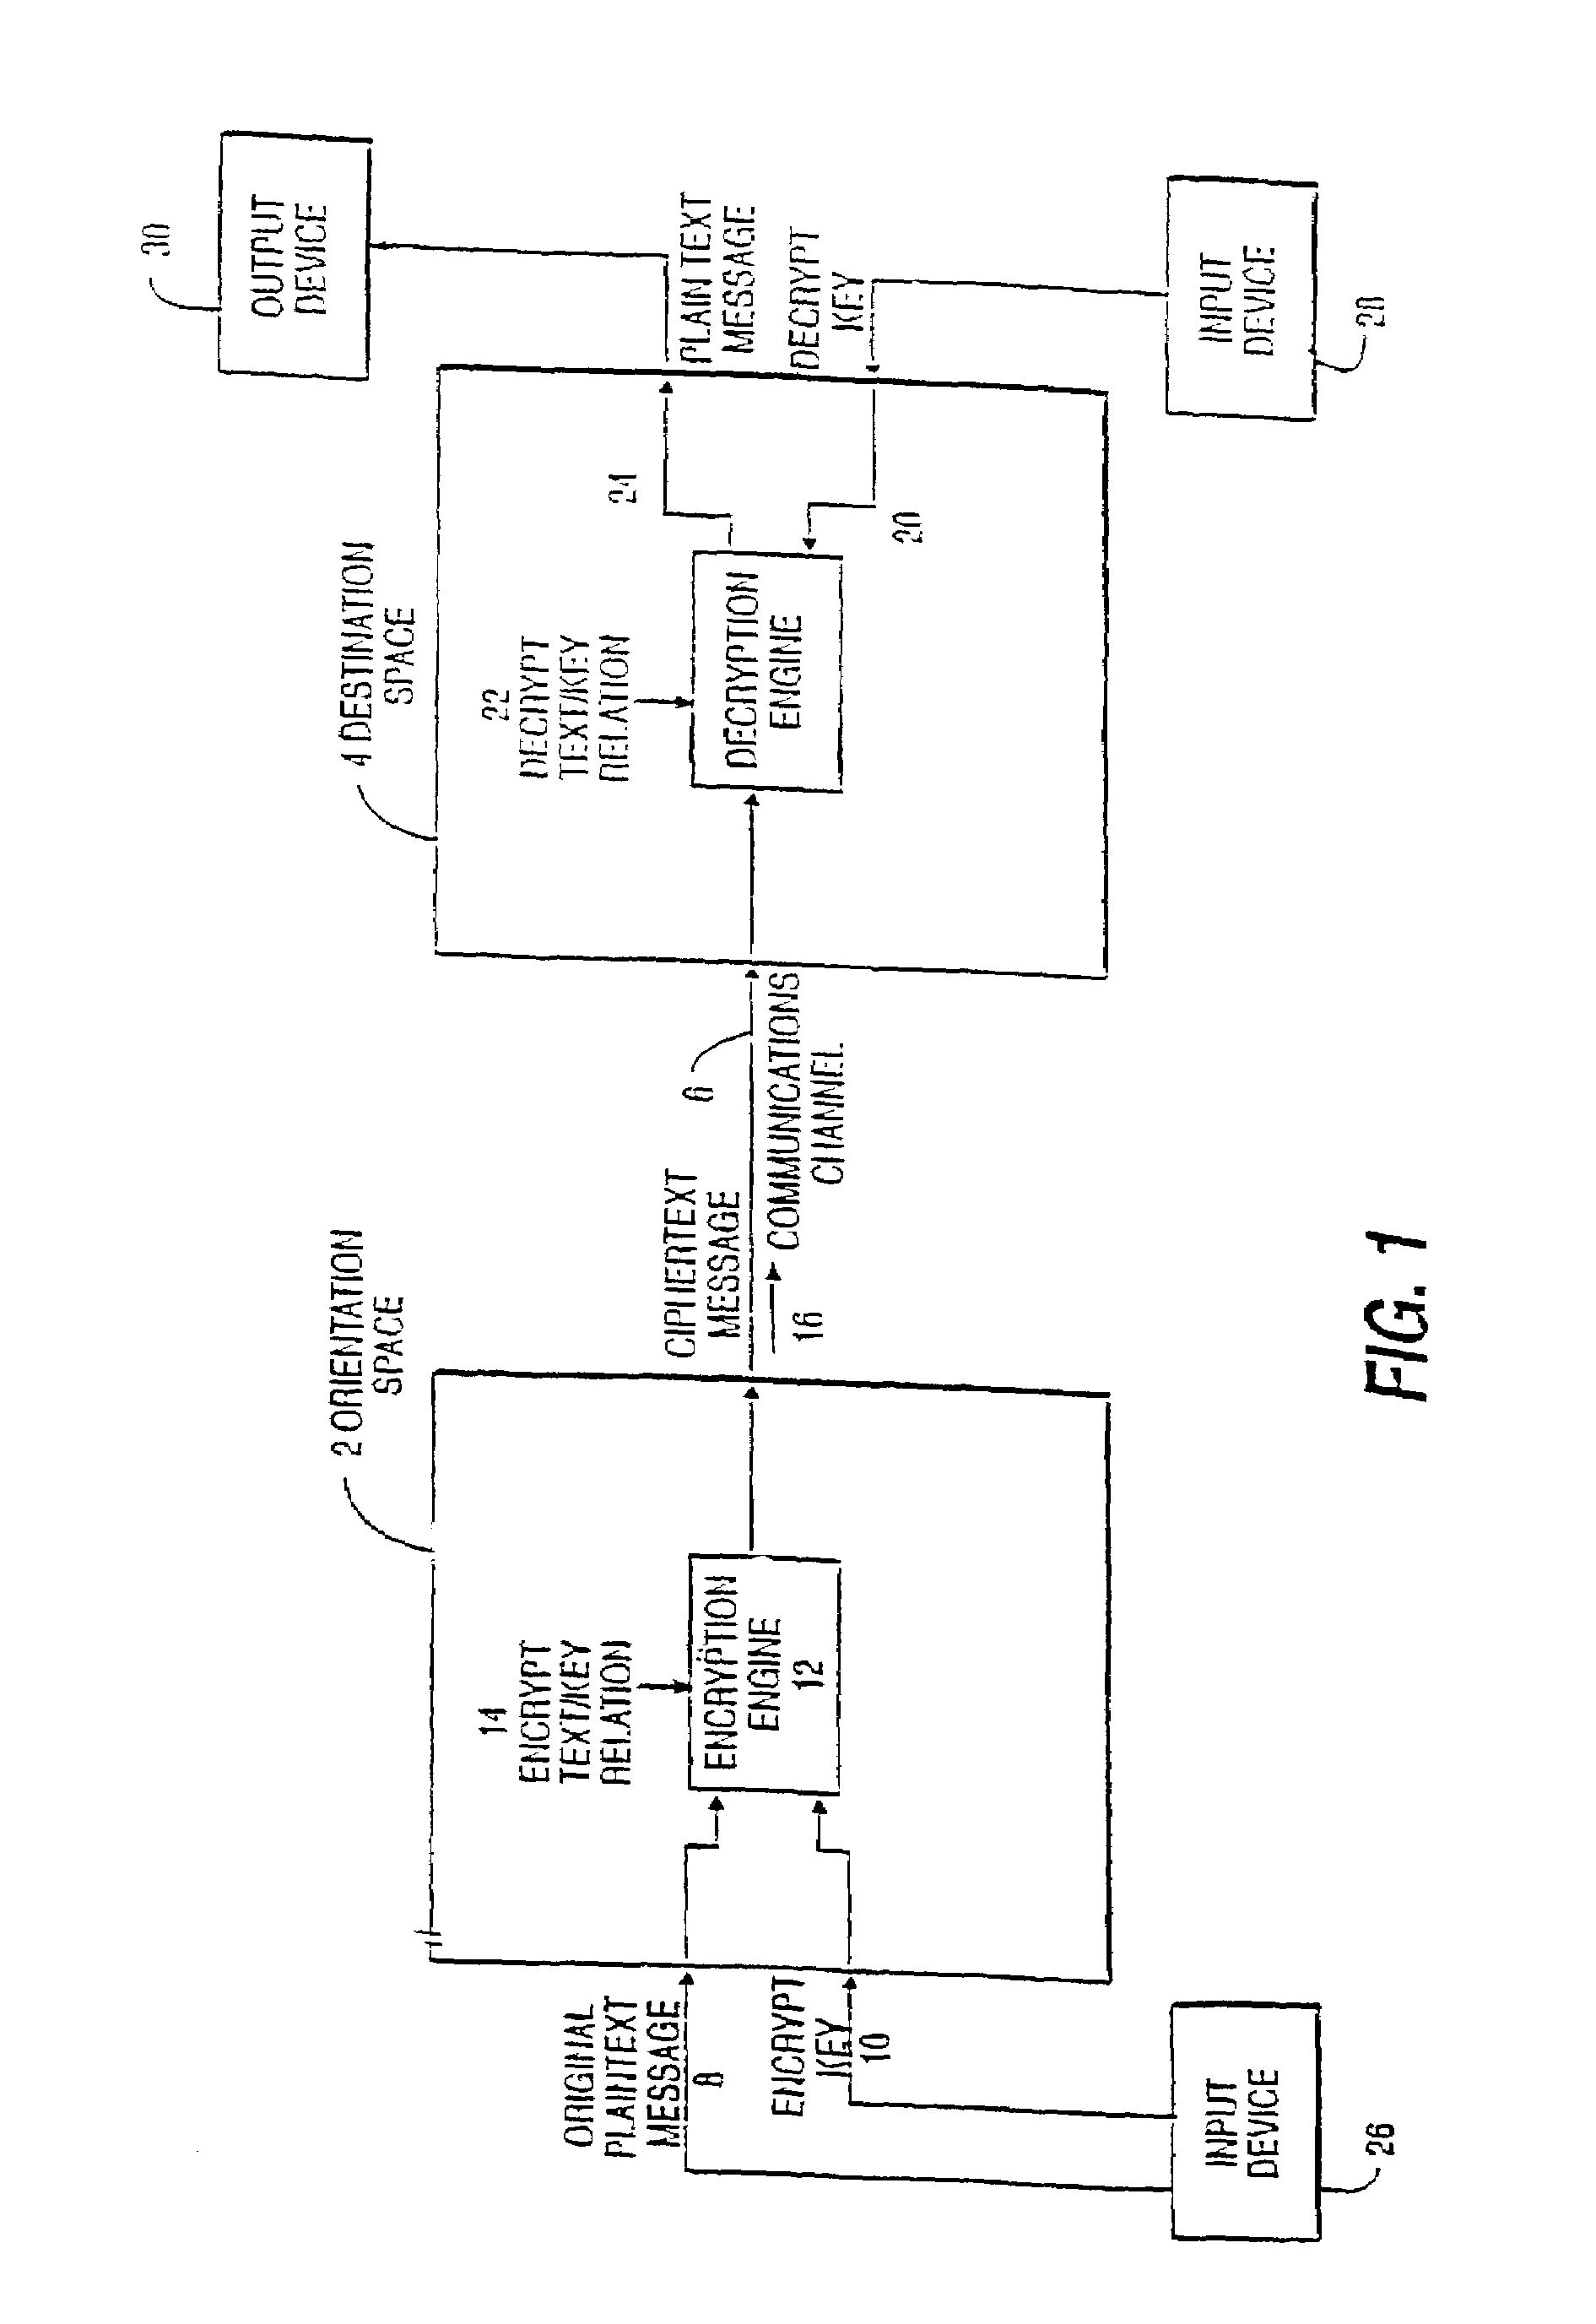 Voice and data encryption method using a cryptographic key split combiner